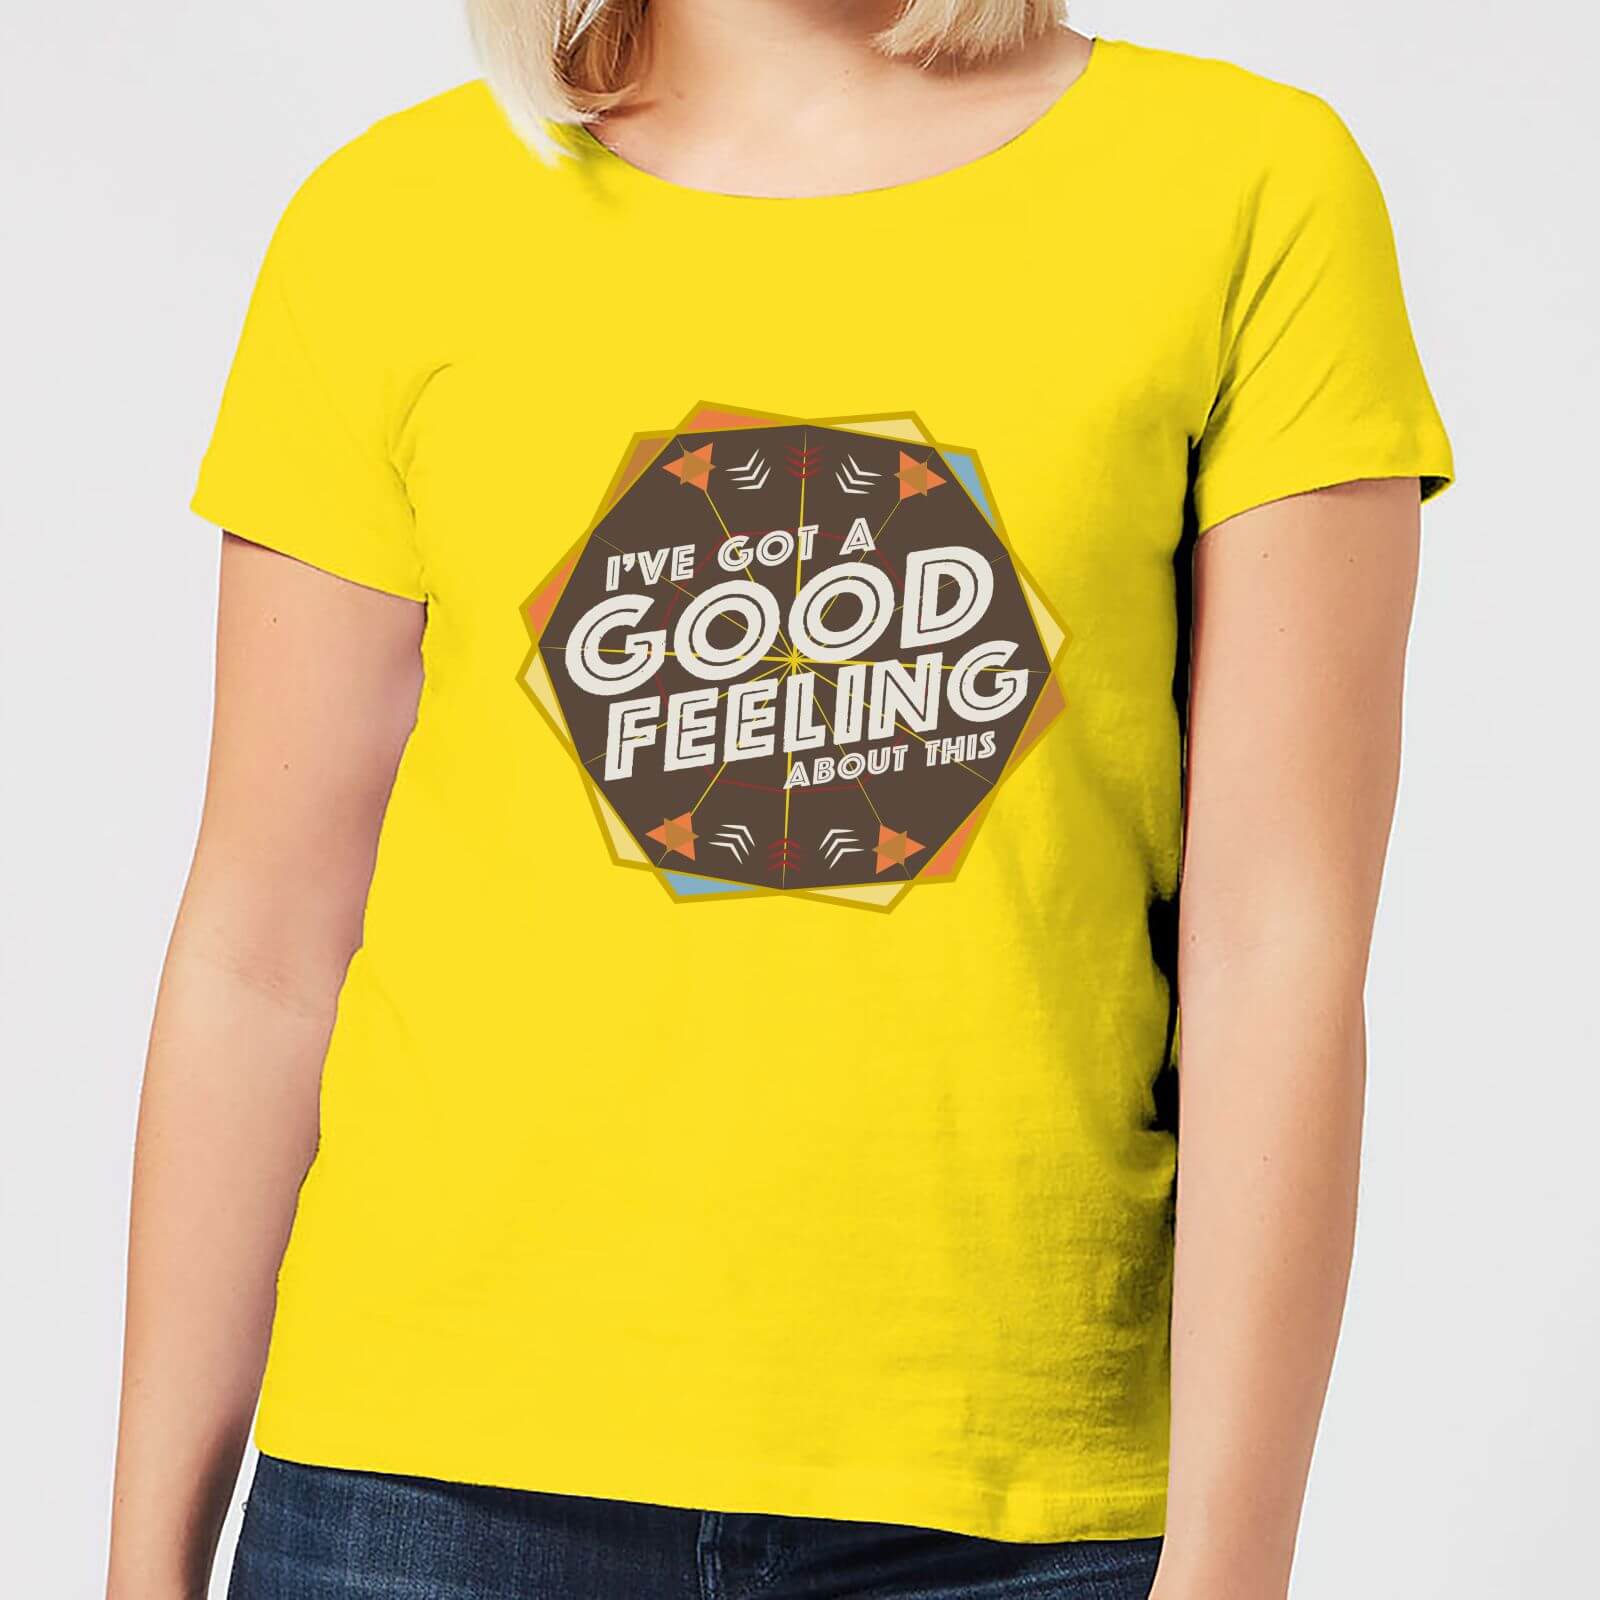 Crystal Maze I've Got A Good Feeling About This- Aztec Women's T-Shirt - Yellow - S - Yellow